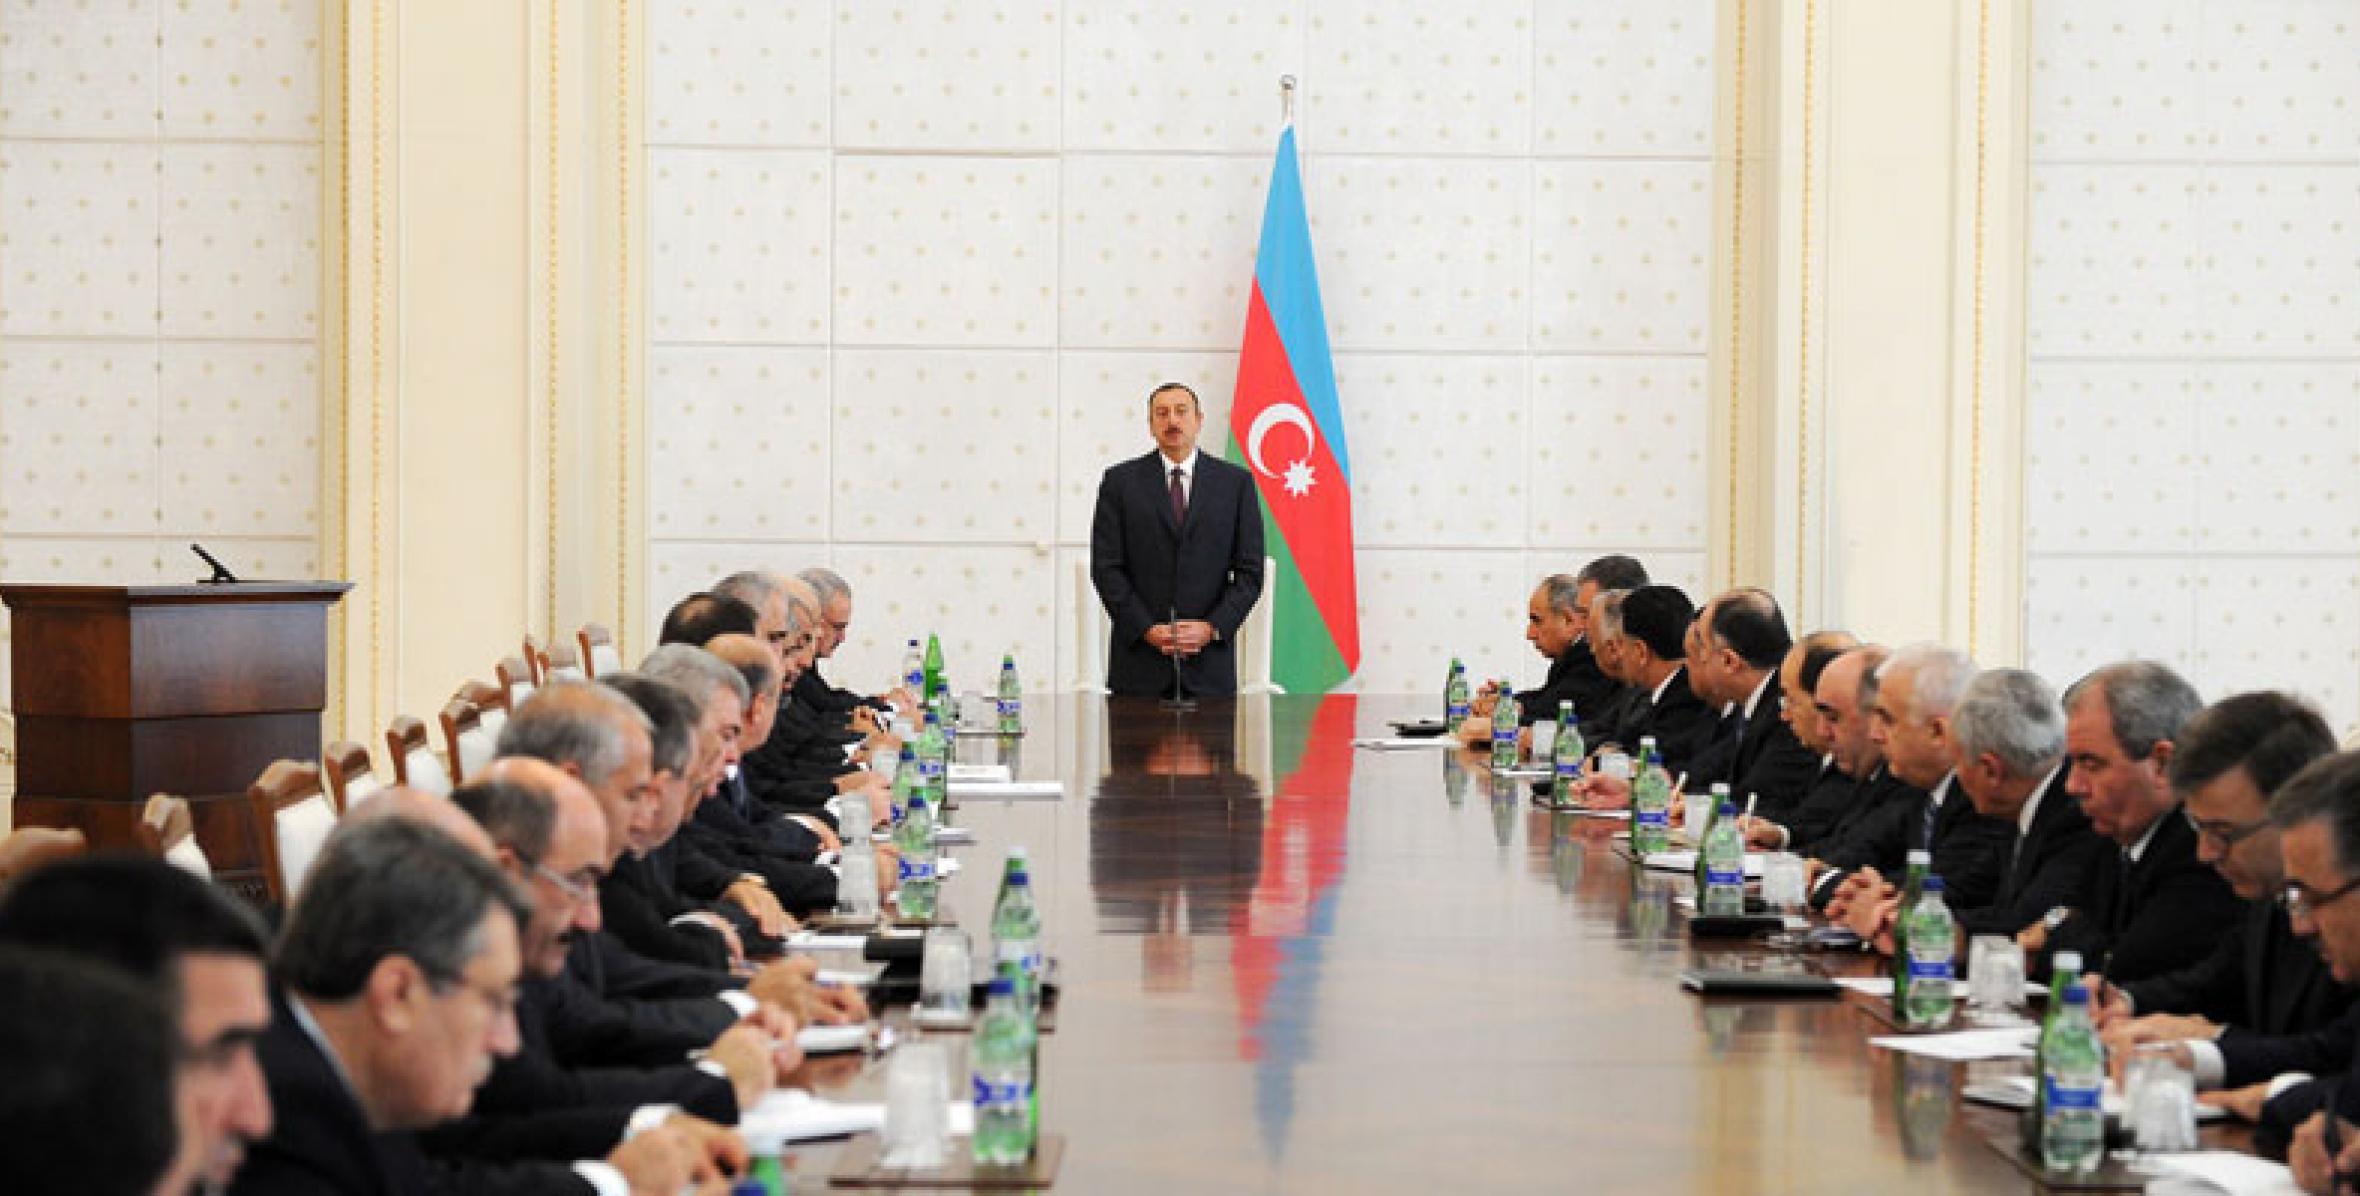 Closing remarks by Ilham Aliyev at a meeting of the Cabinet of Ministers on the results of socioeconomic development in the first nine months of 2010